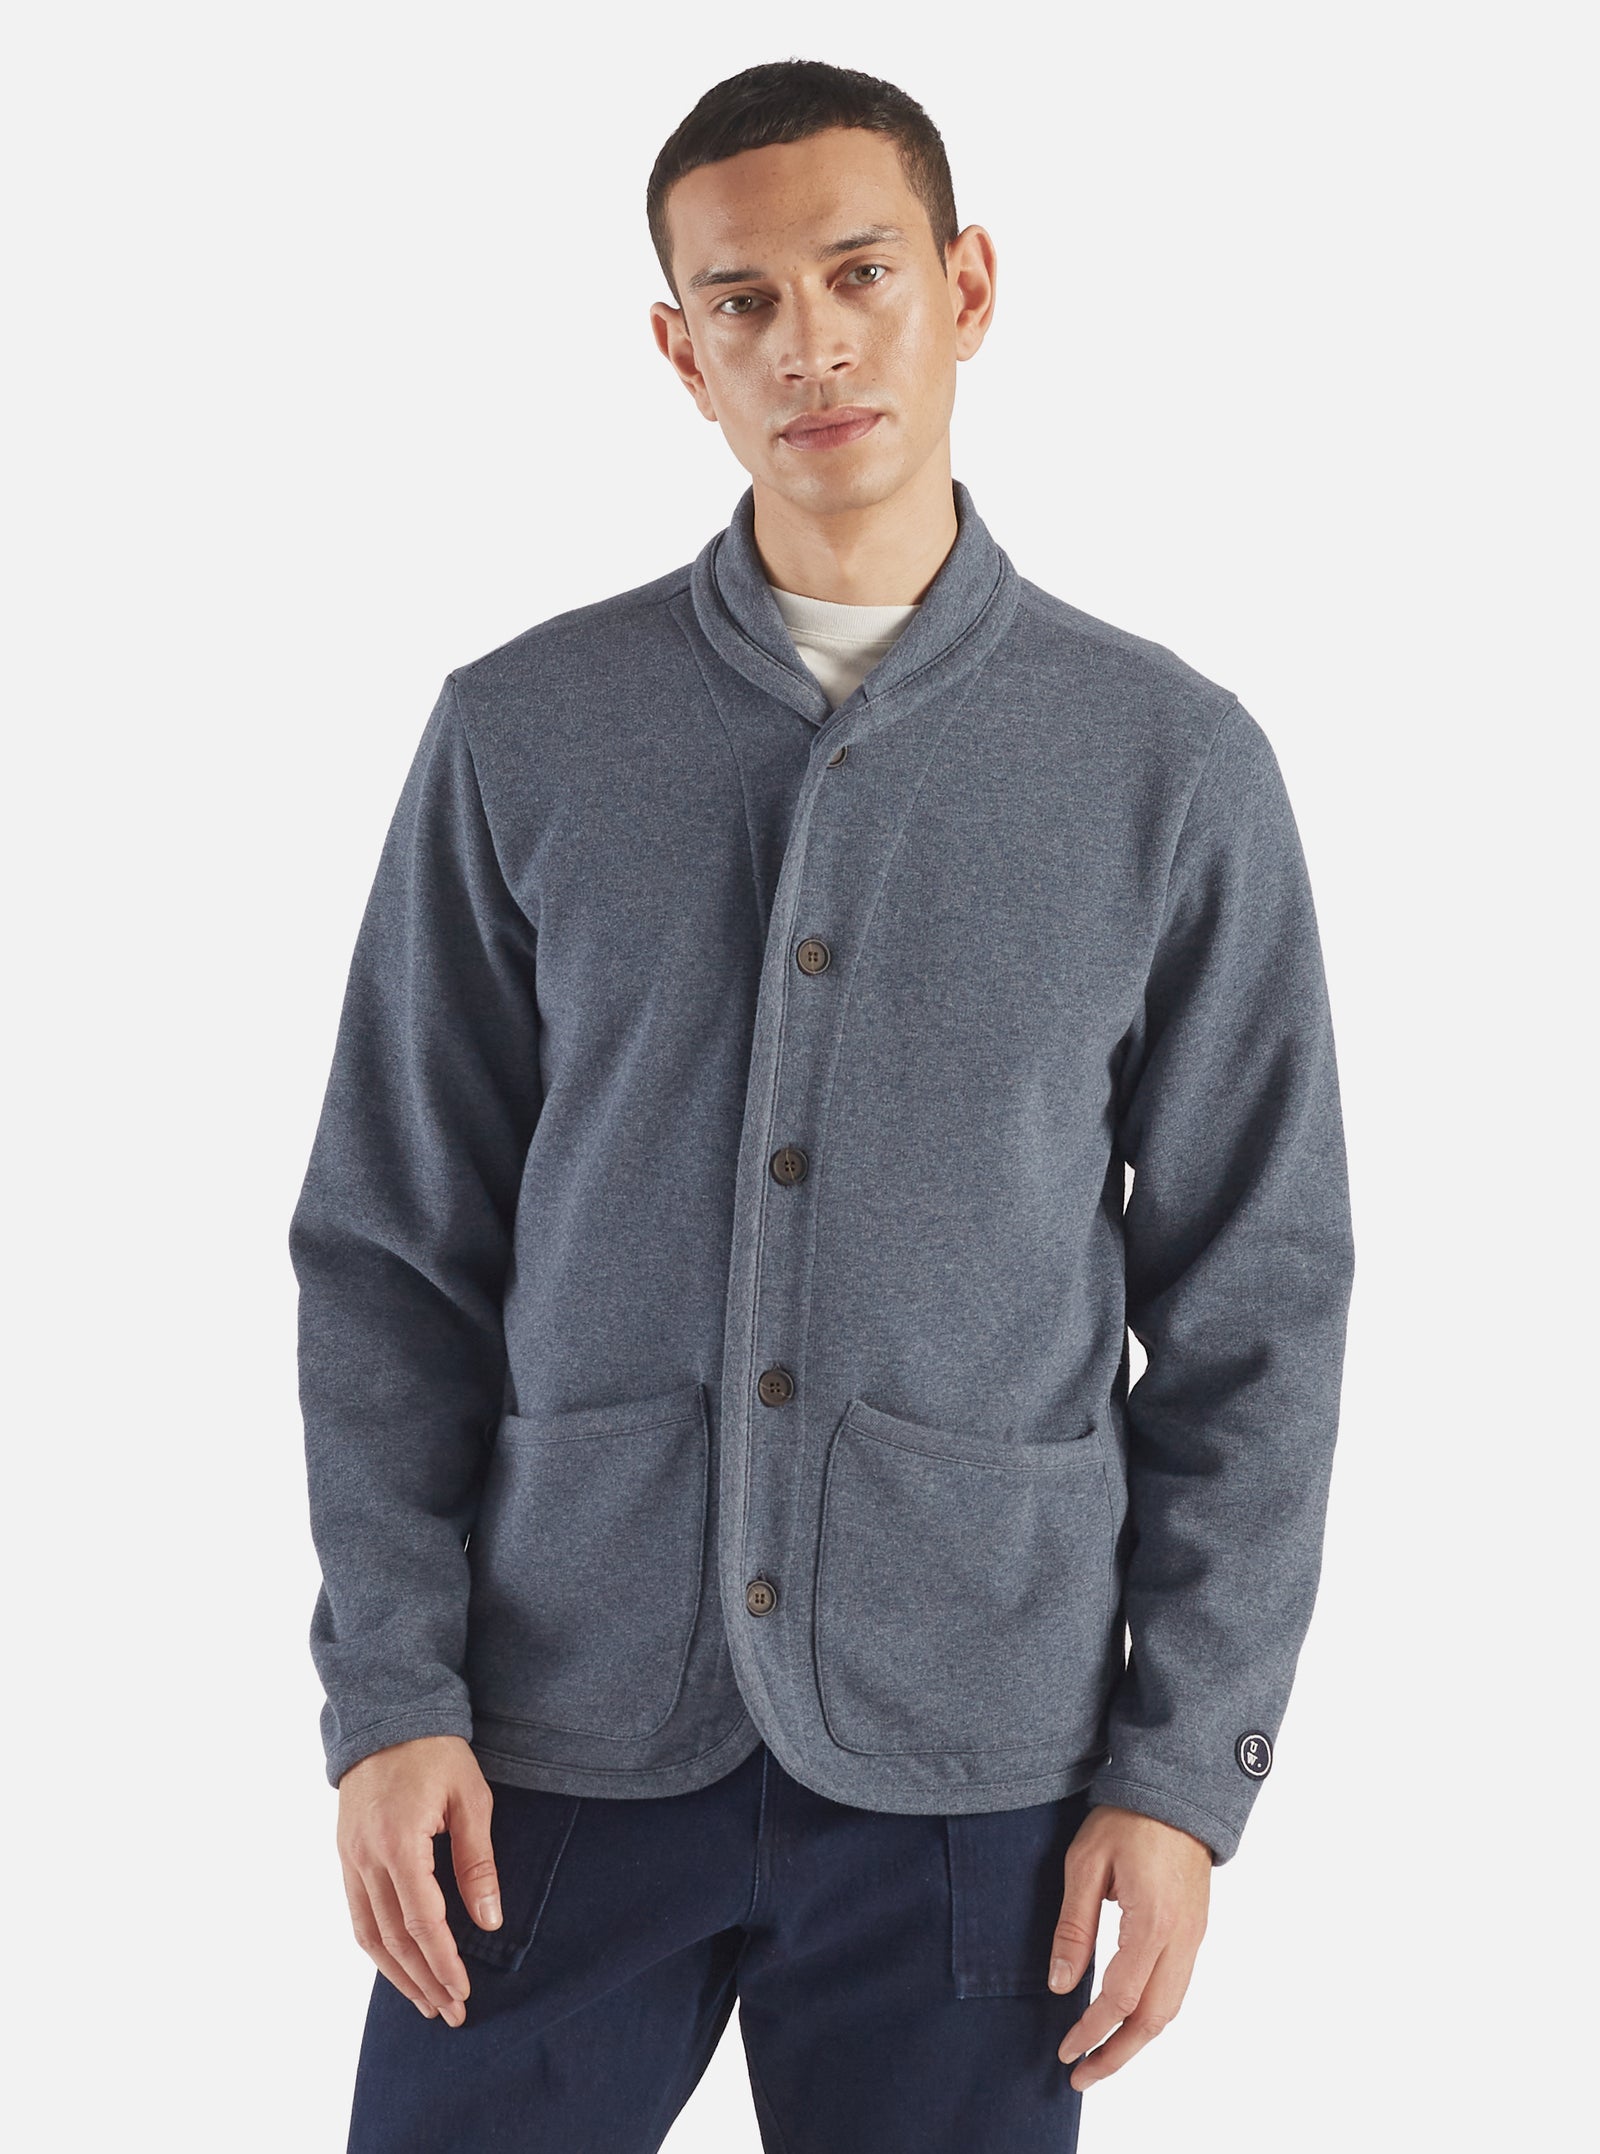 Universal Works Lancaster Jacket in Navy Recycled Cotton Blend Jersey